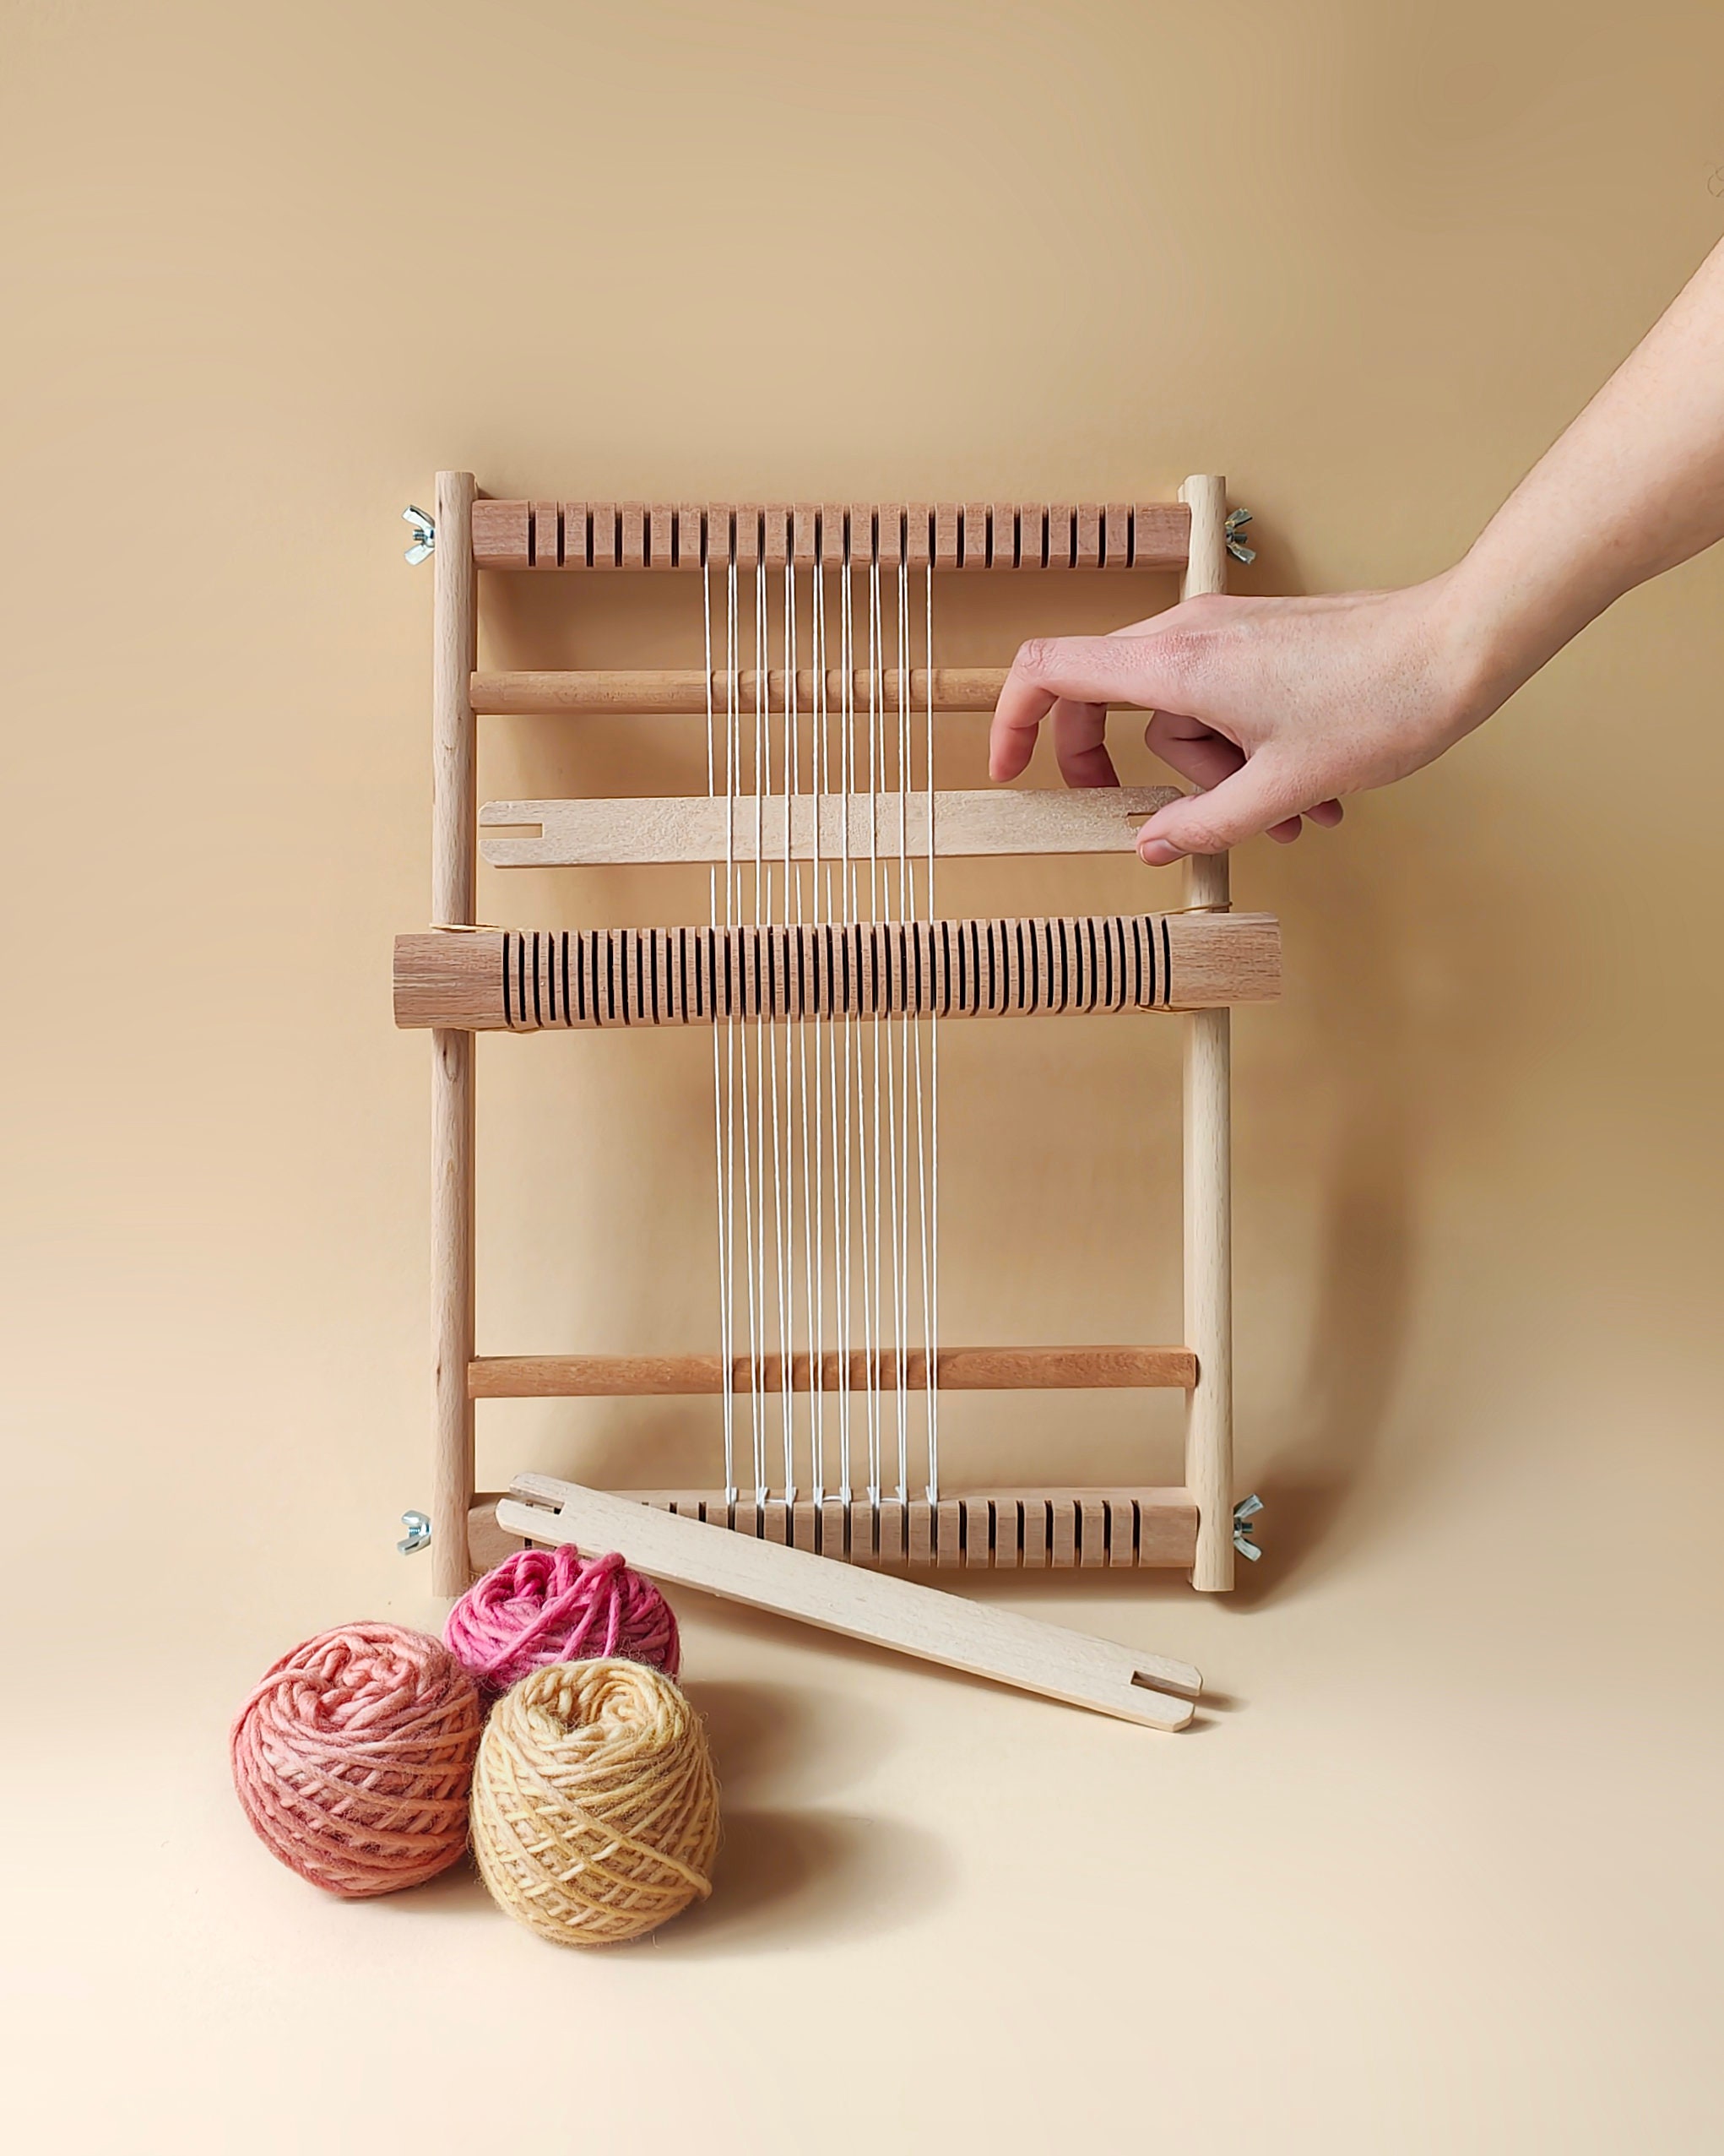 Square Pin Loom Speed Weaving - How Did You Make This?